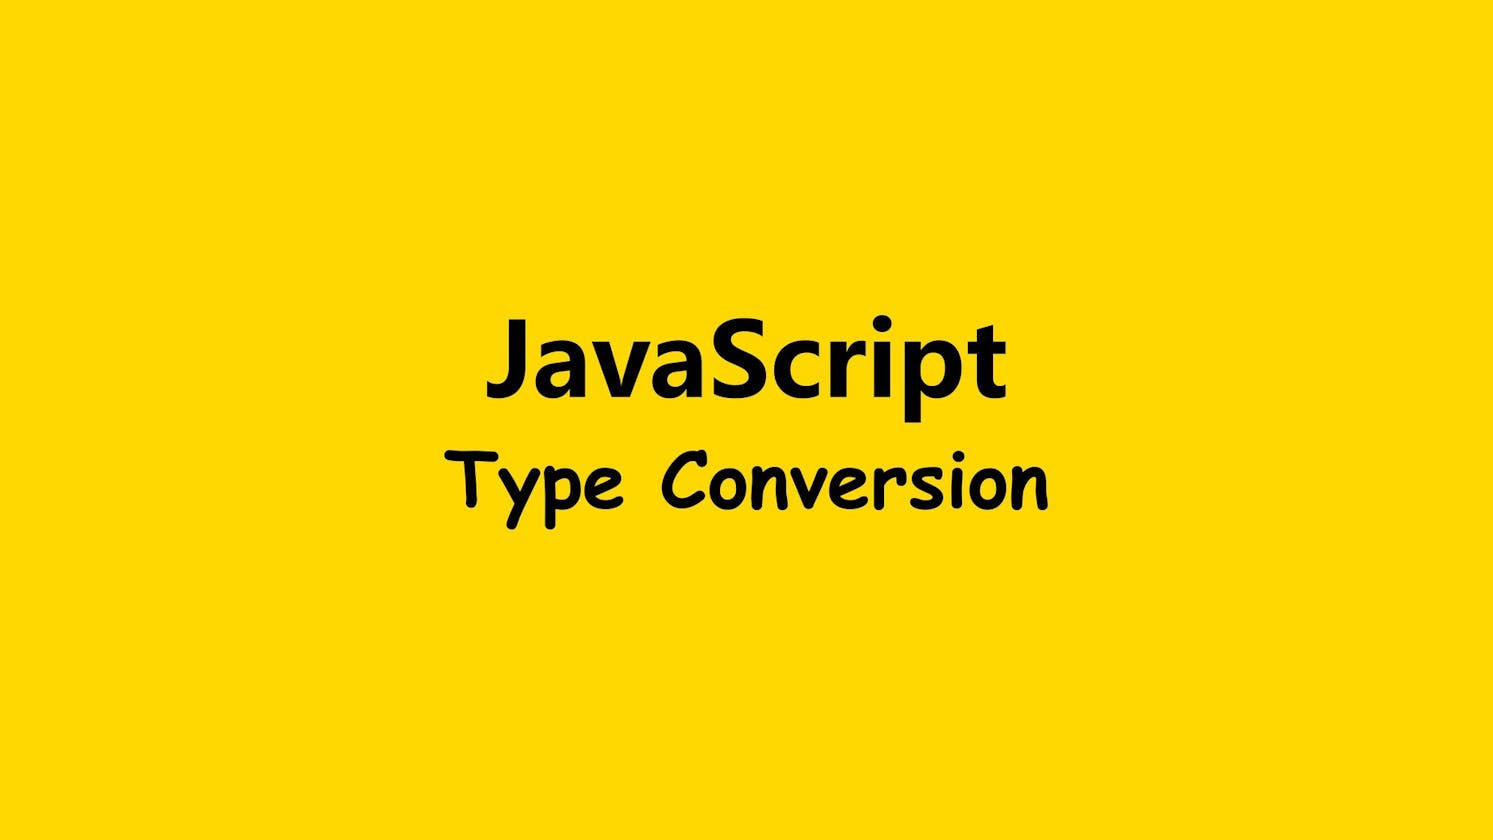 A Guide to Mastery in Type Conversion on JavaScript